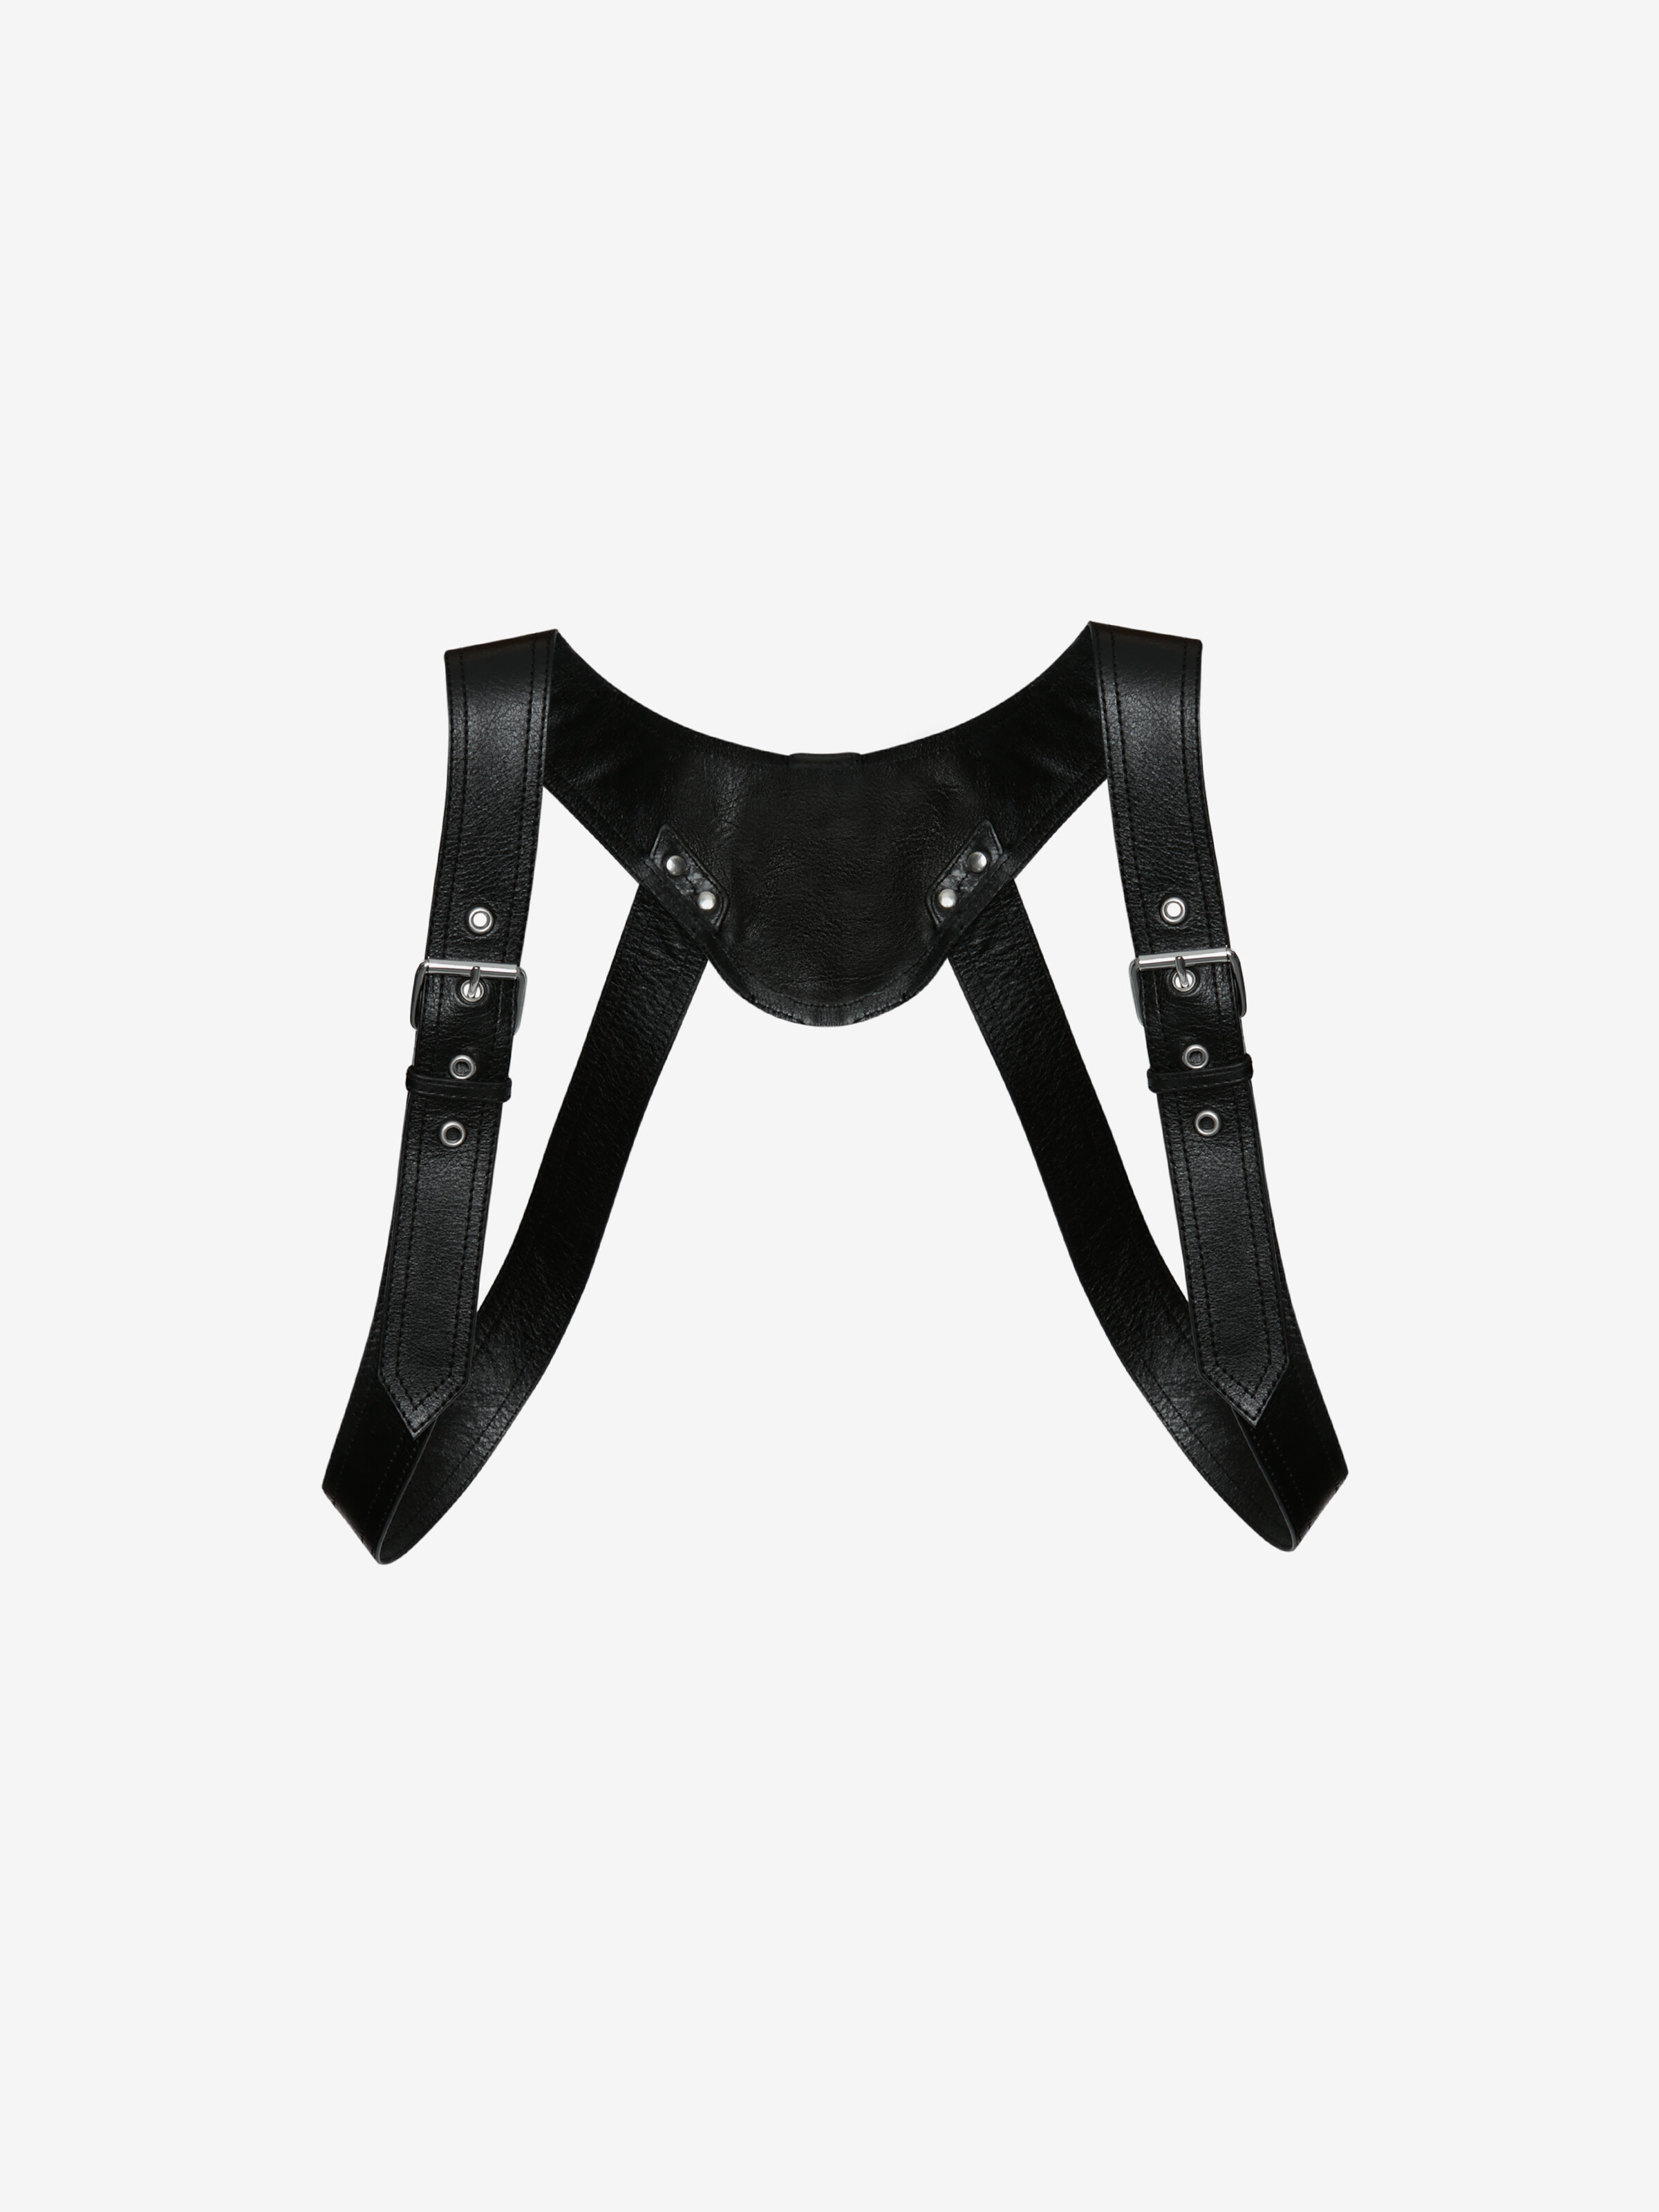 Alexander McQueen Fall 2011 rtw Leather Harness